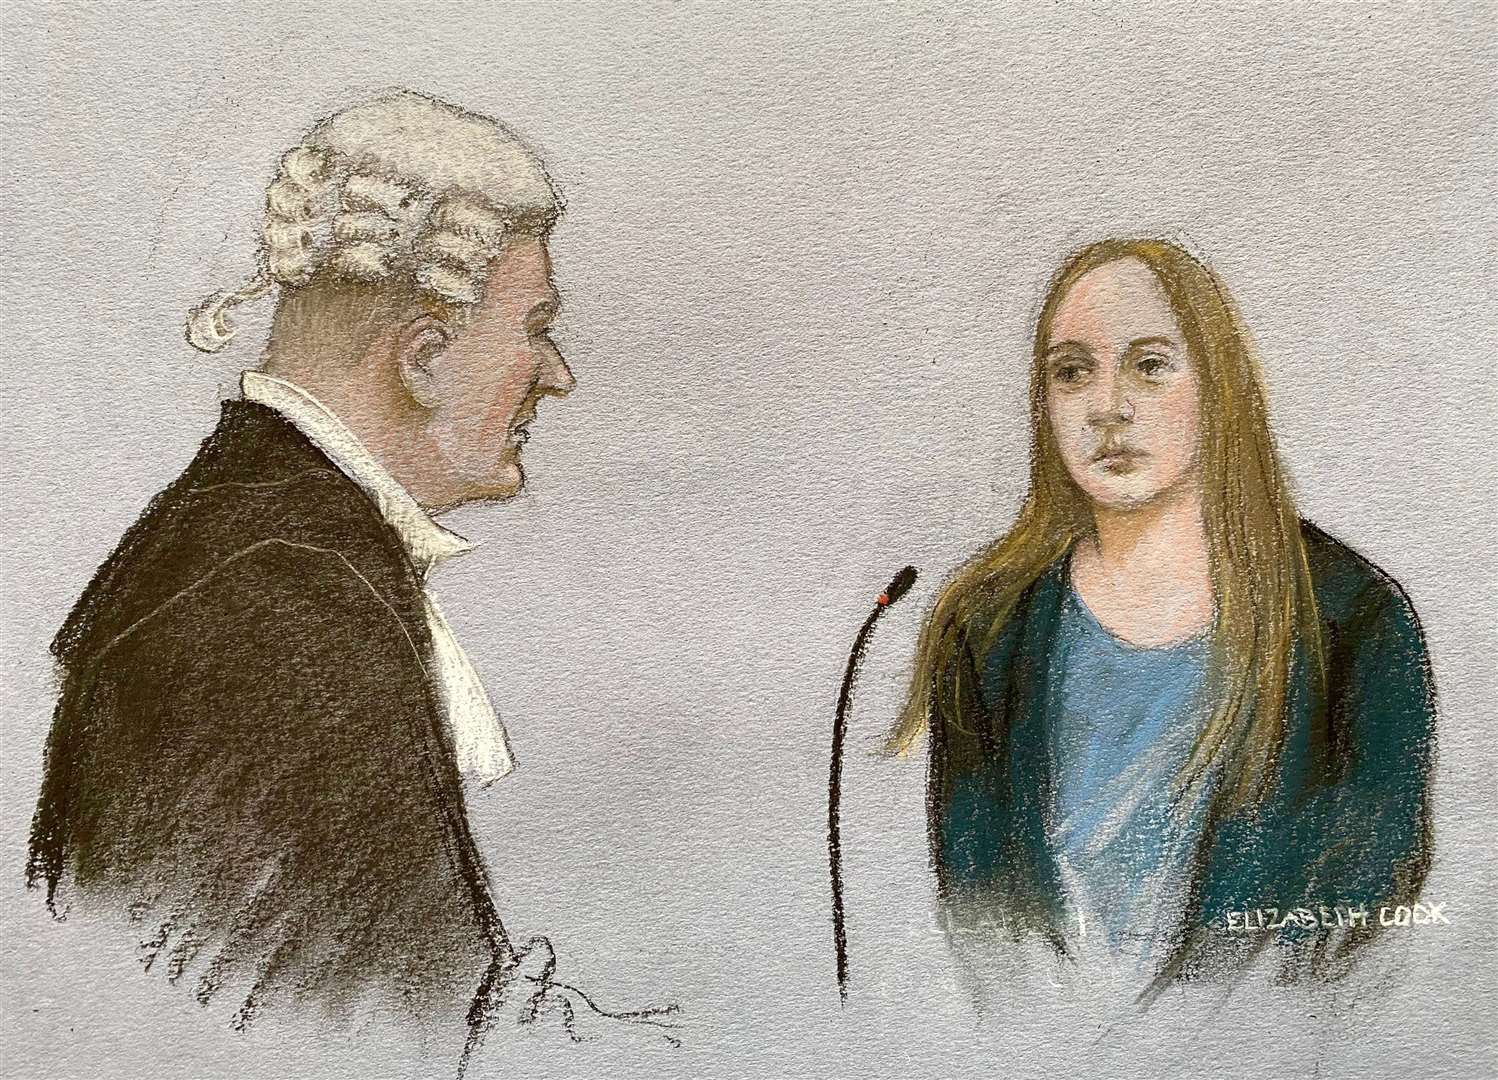 Court artist drawing by Elizabeth Cook of prosecutor Nick Johnson KC cross-examining Lucy Letby during her trial at Manchester Crown Court (Elizabeth Cook/PA)